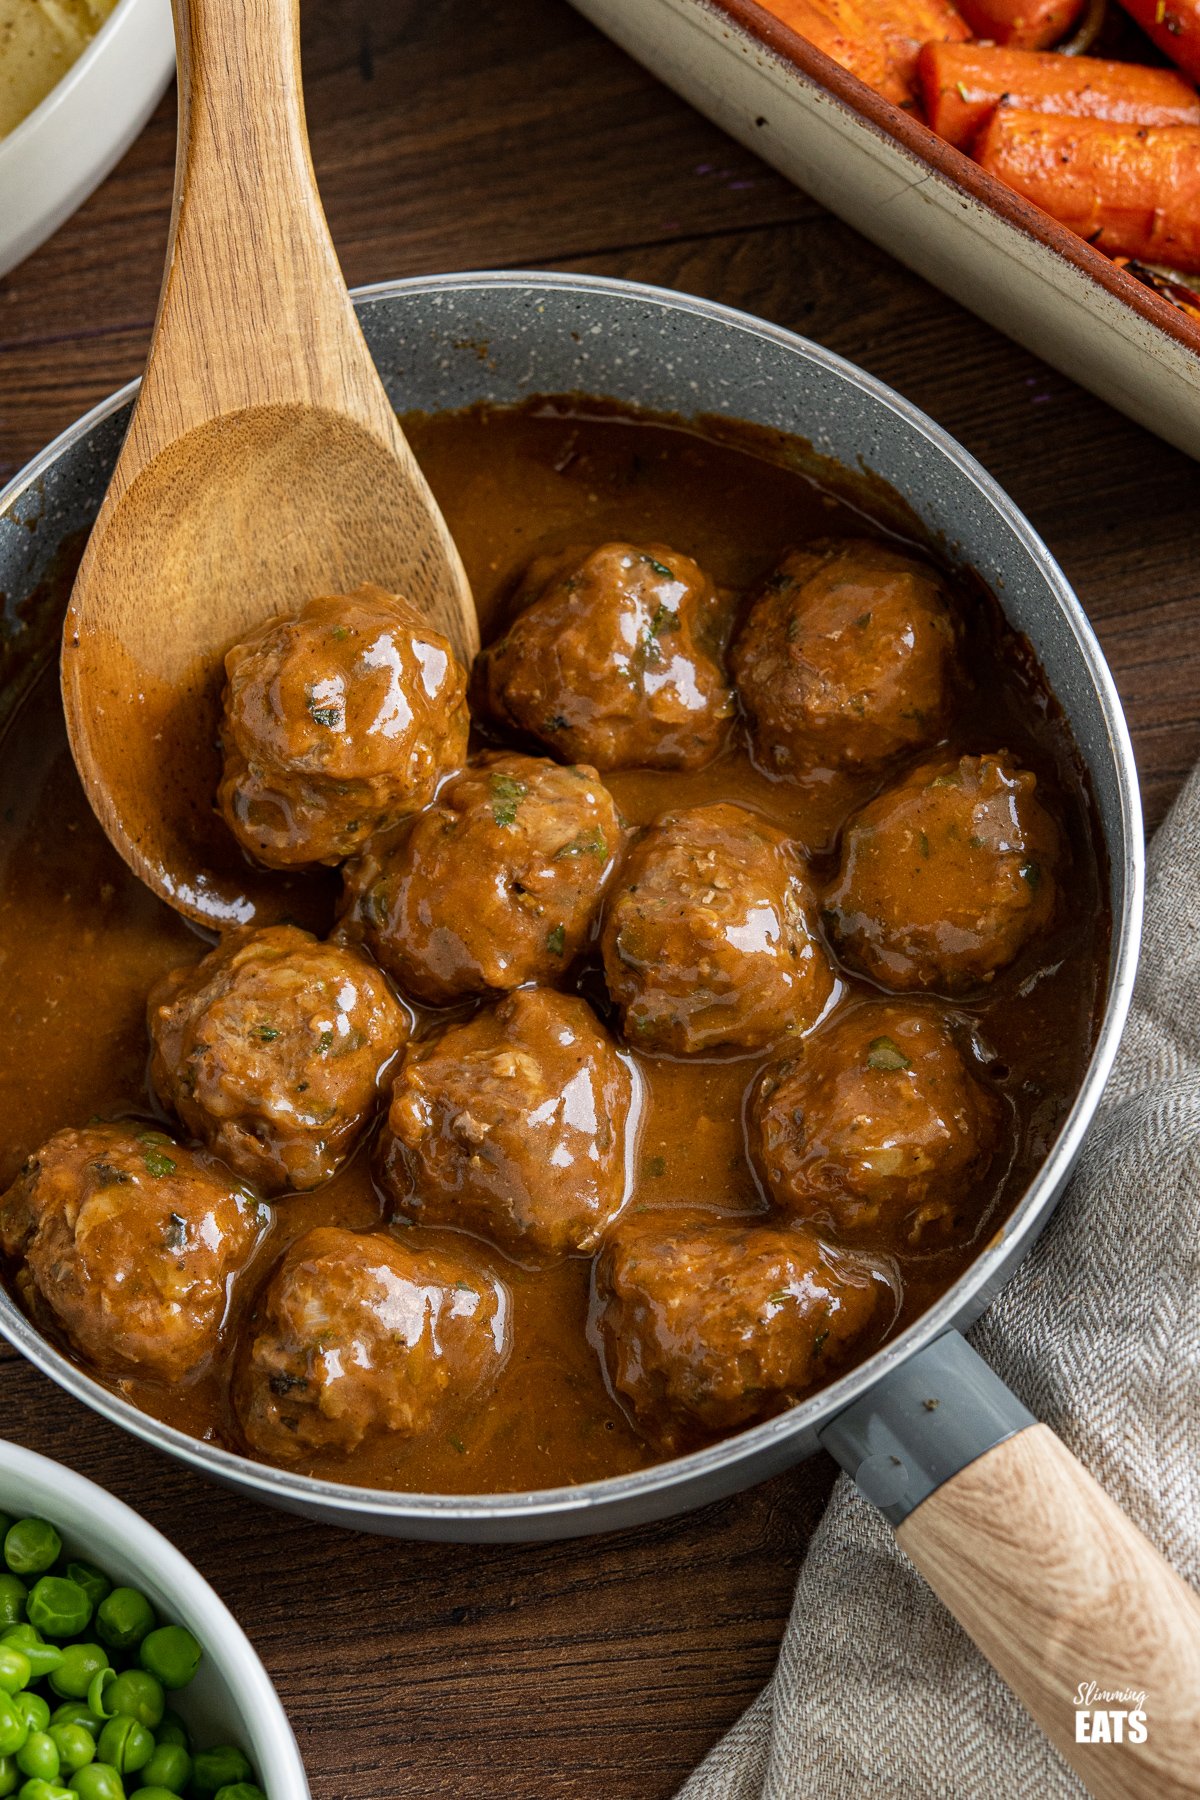 Lamb Meatballs with Mint Gravy in a wooden handled frying pan